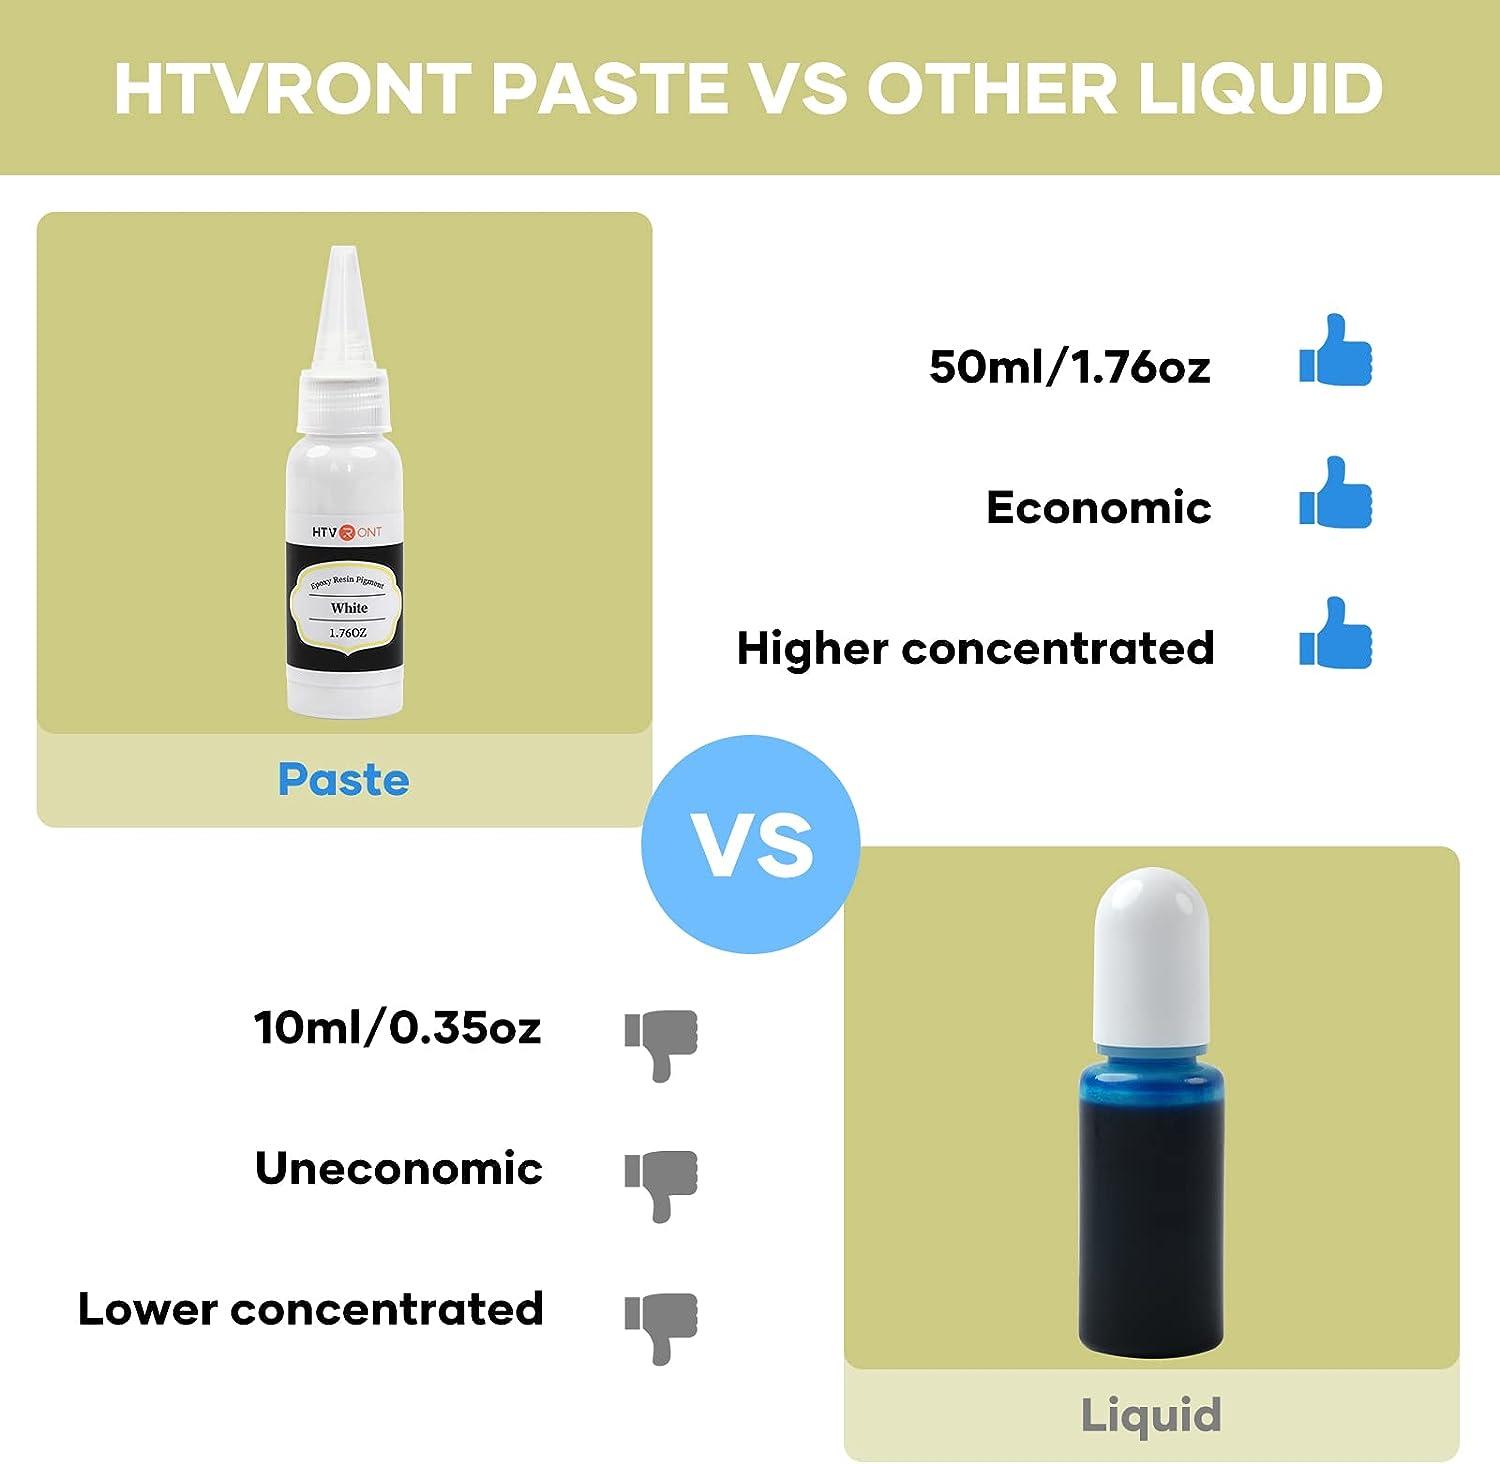 HTVRONT White Resin Pigment Paste - 1.76oz/50ml White Epoxy Dye Pigment  Higher Concentrated & Easy to Mix White Epoxy Pigment for Resin Coloring  Ocean Waves and Water Effects